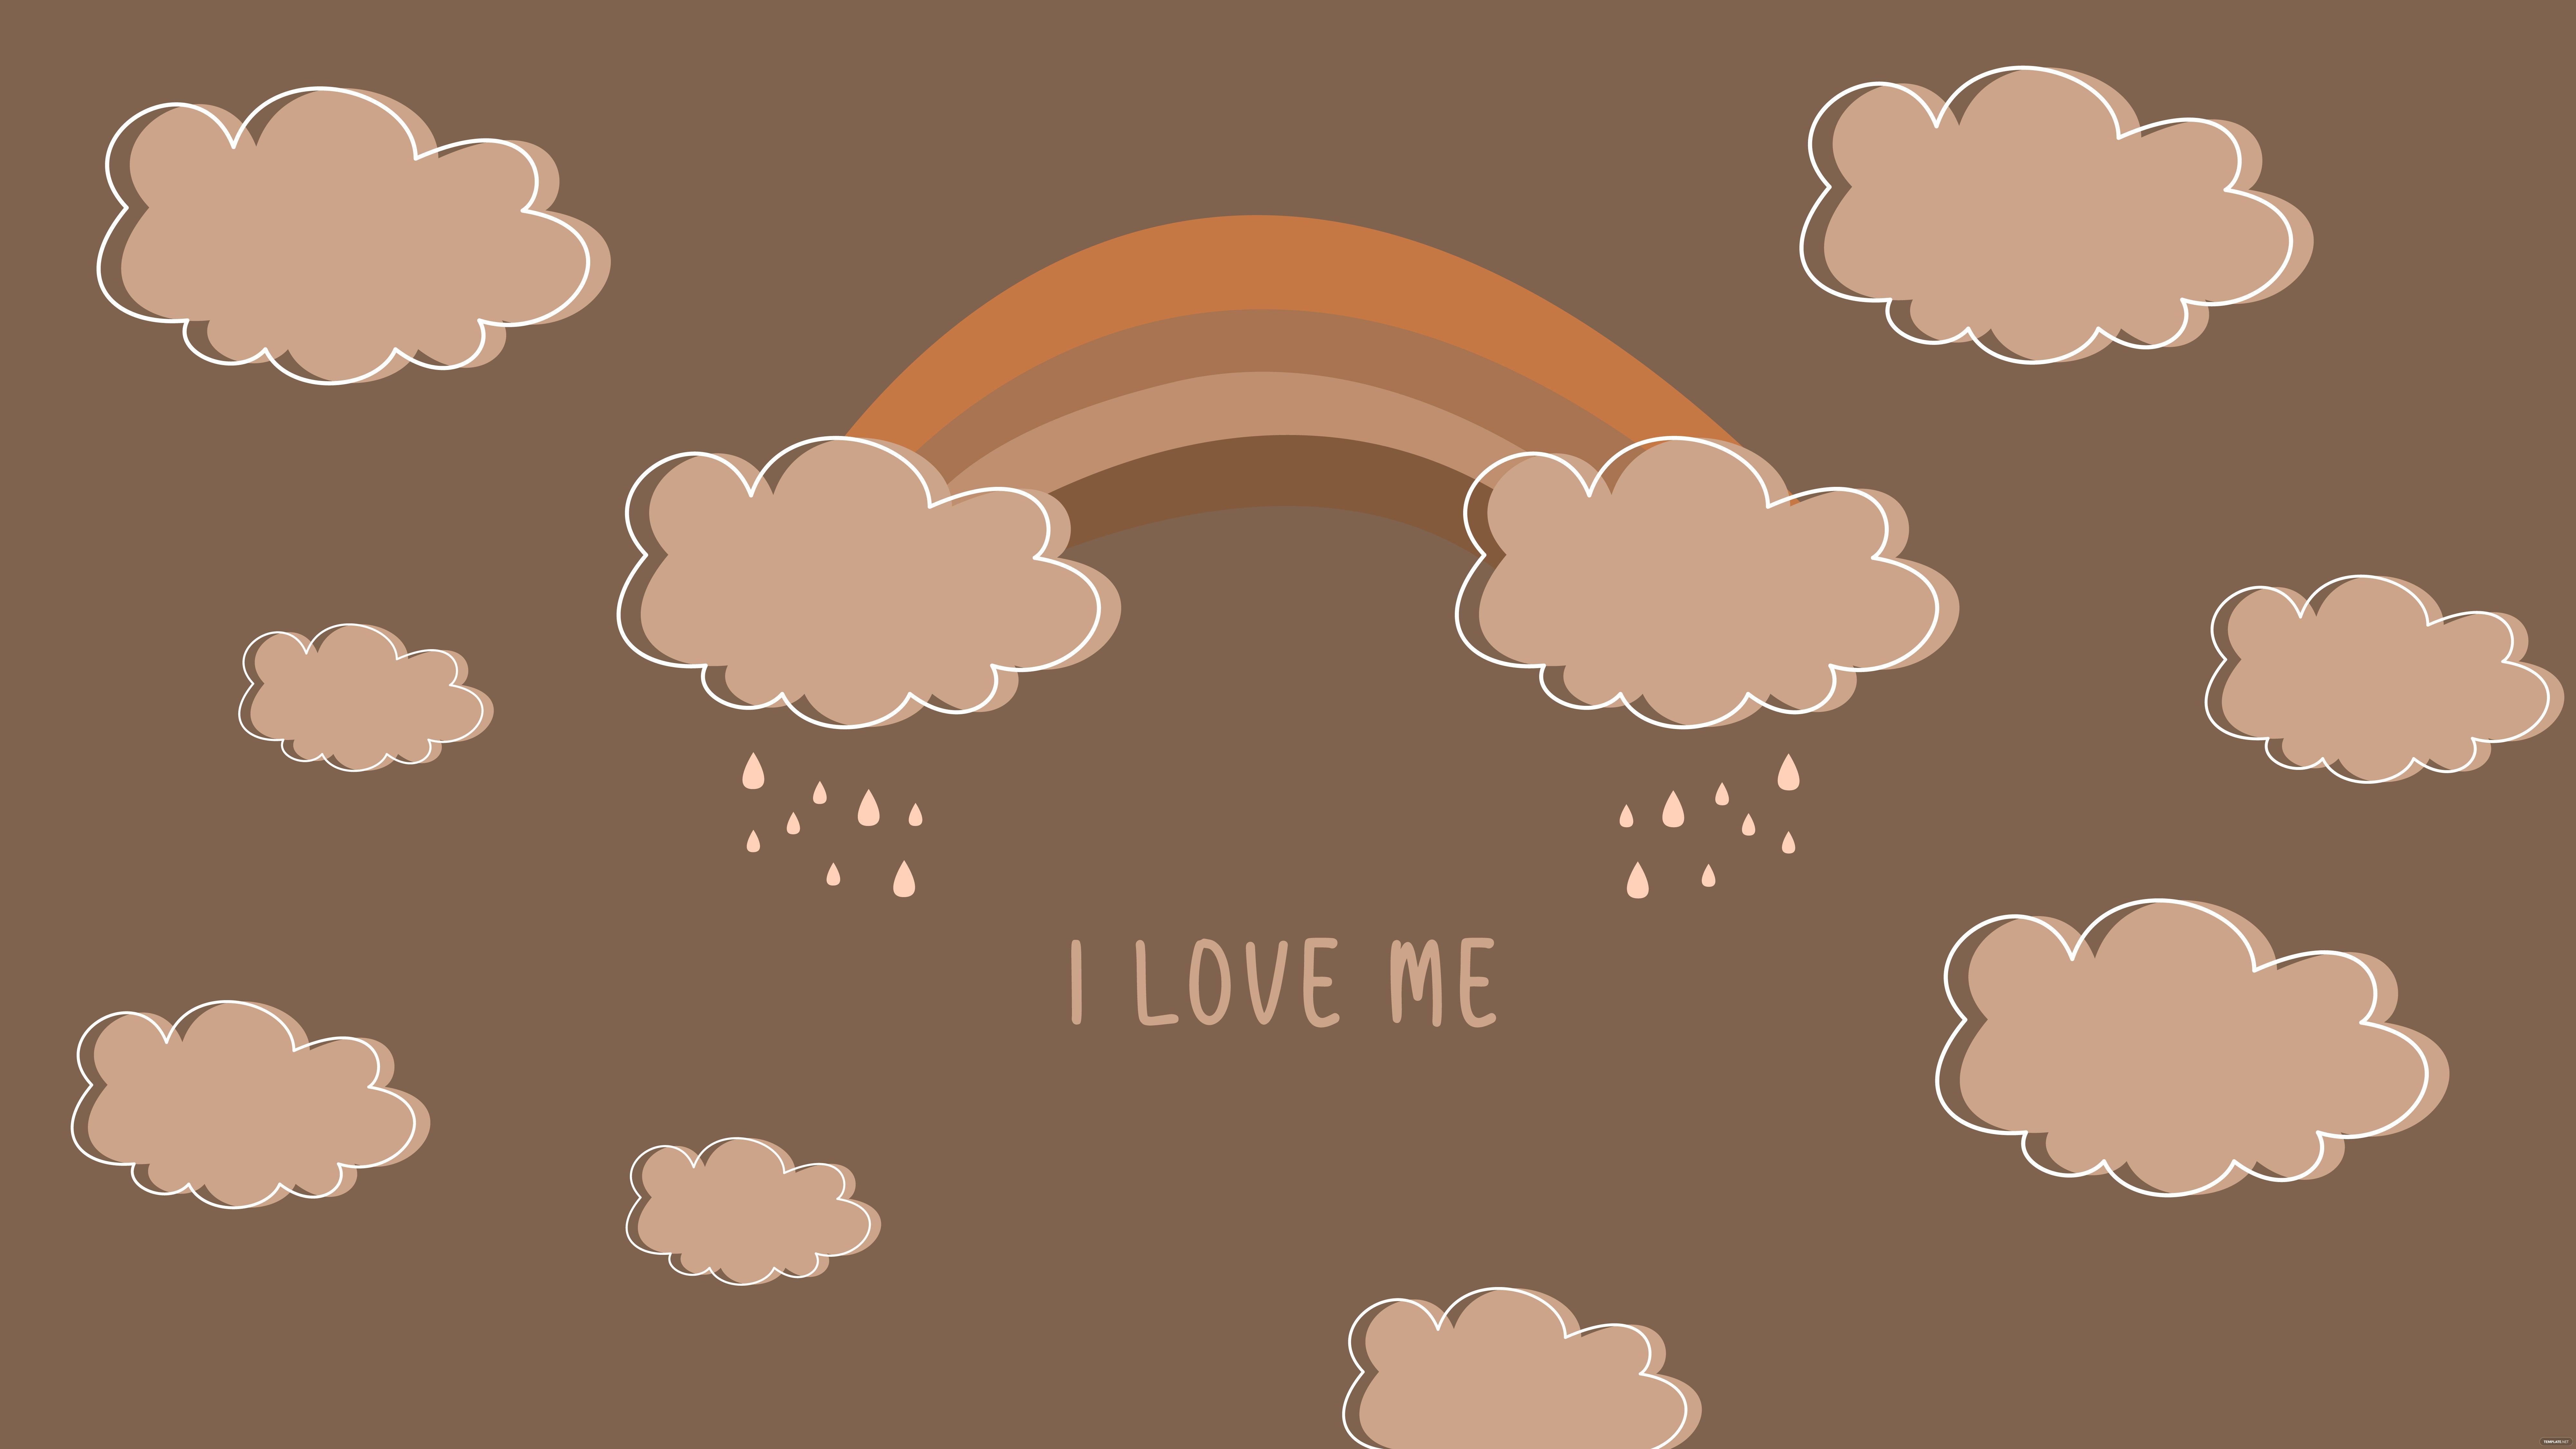 A rainbow and clouds on brown background - Preppy